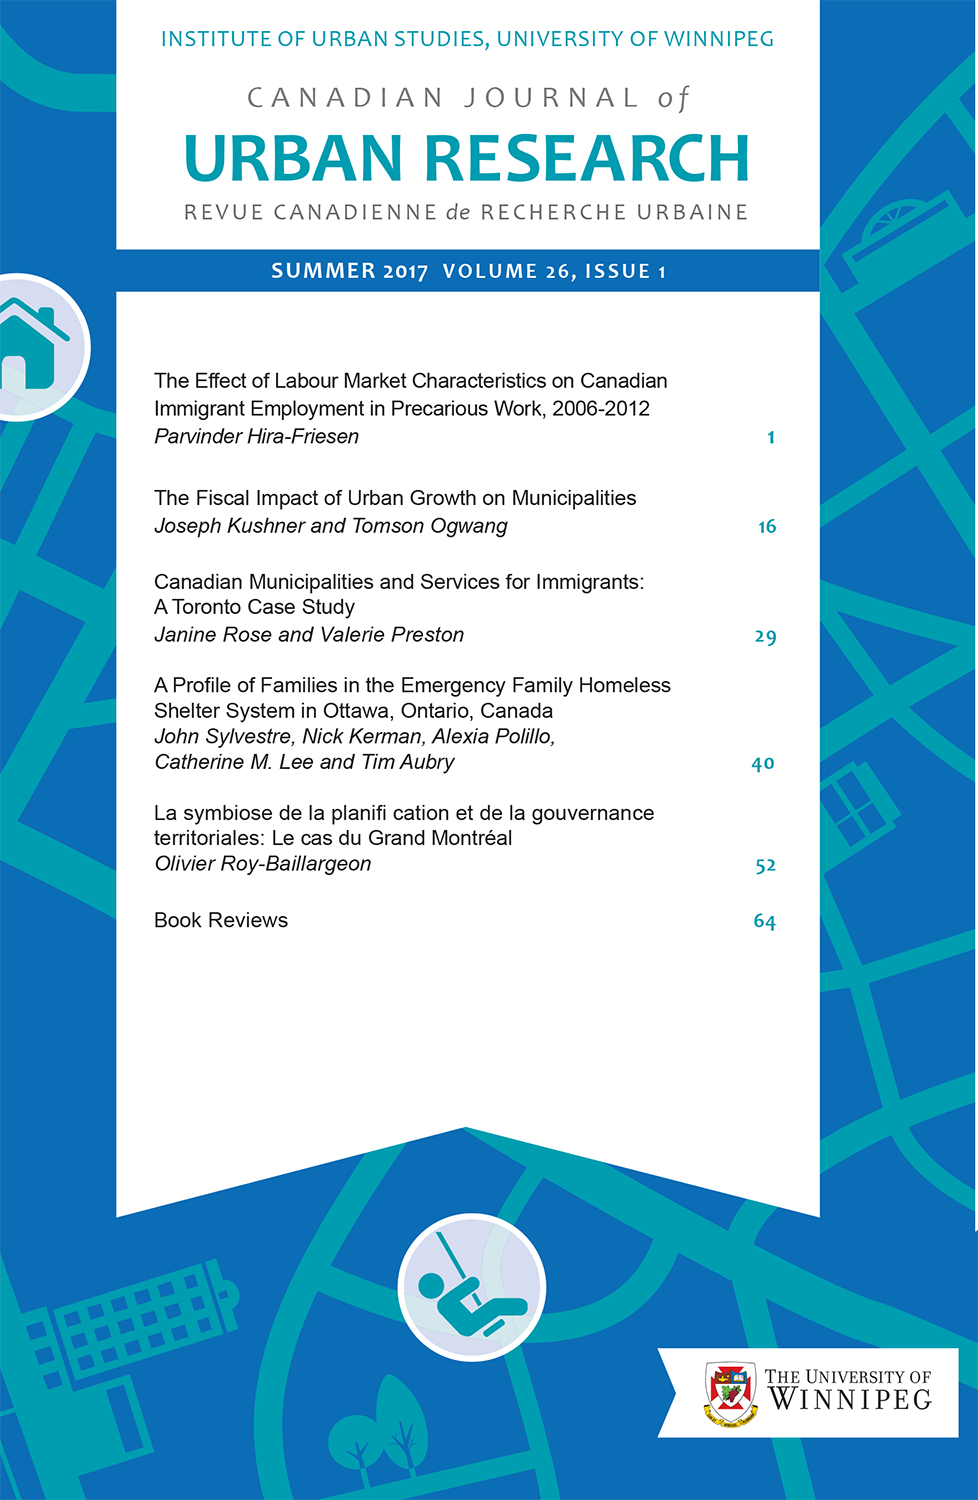 					View Vol. 26 No. 1 (2017): Canadian Journal of Urban Research - Summer 2017
				